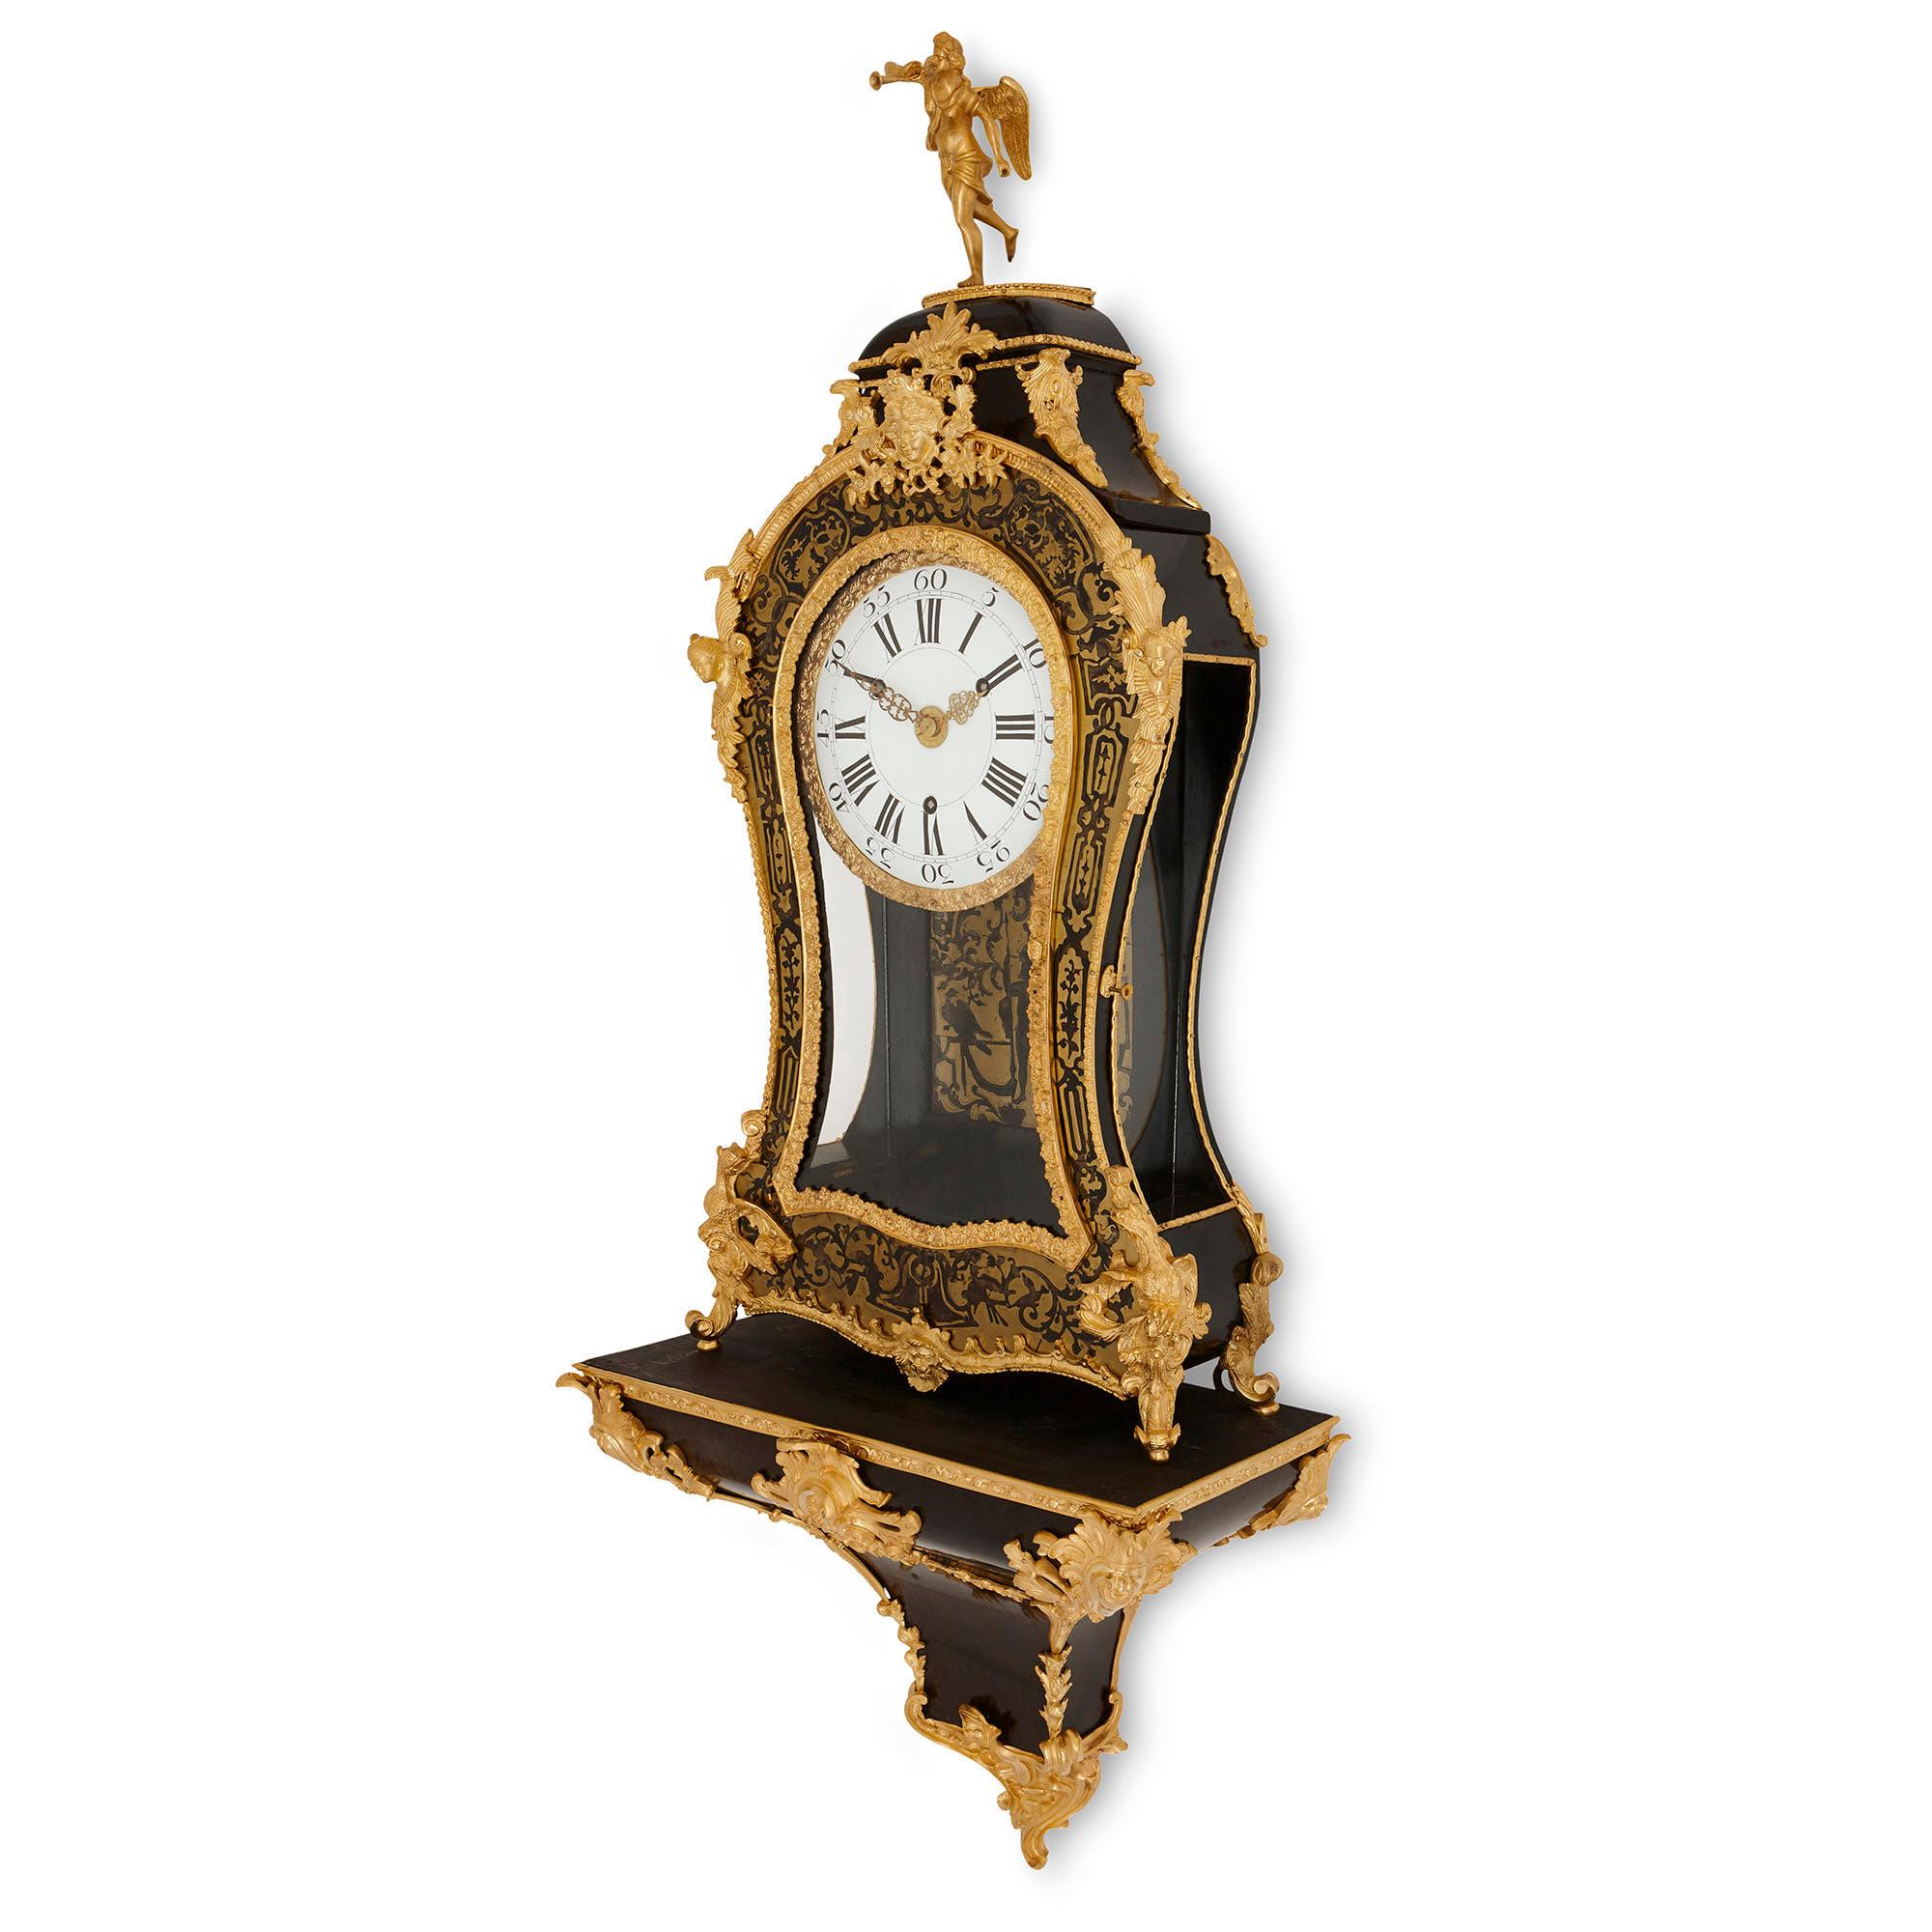 This Boulle wall clock is comprised of two components: the clock body and the bracket upon which the clock body sits. The wooden clock case is violin shaped and, where not decorated with brass inlayed with tortoiseshell, this wood has been ebonised.